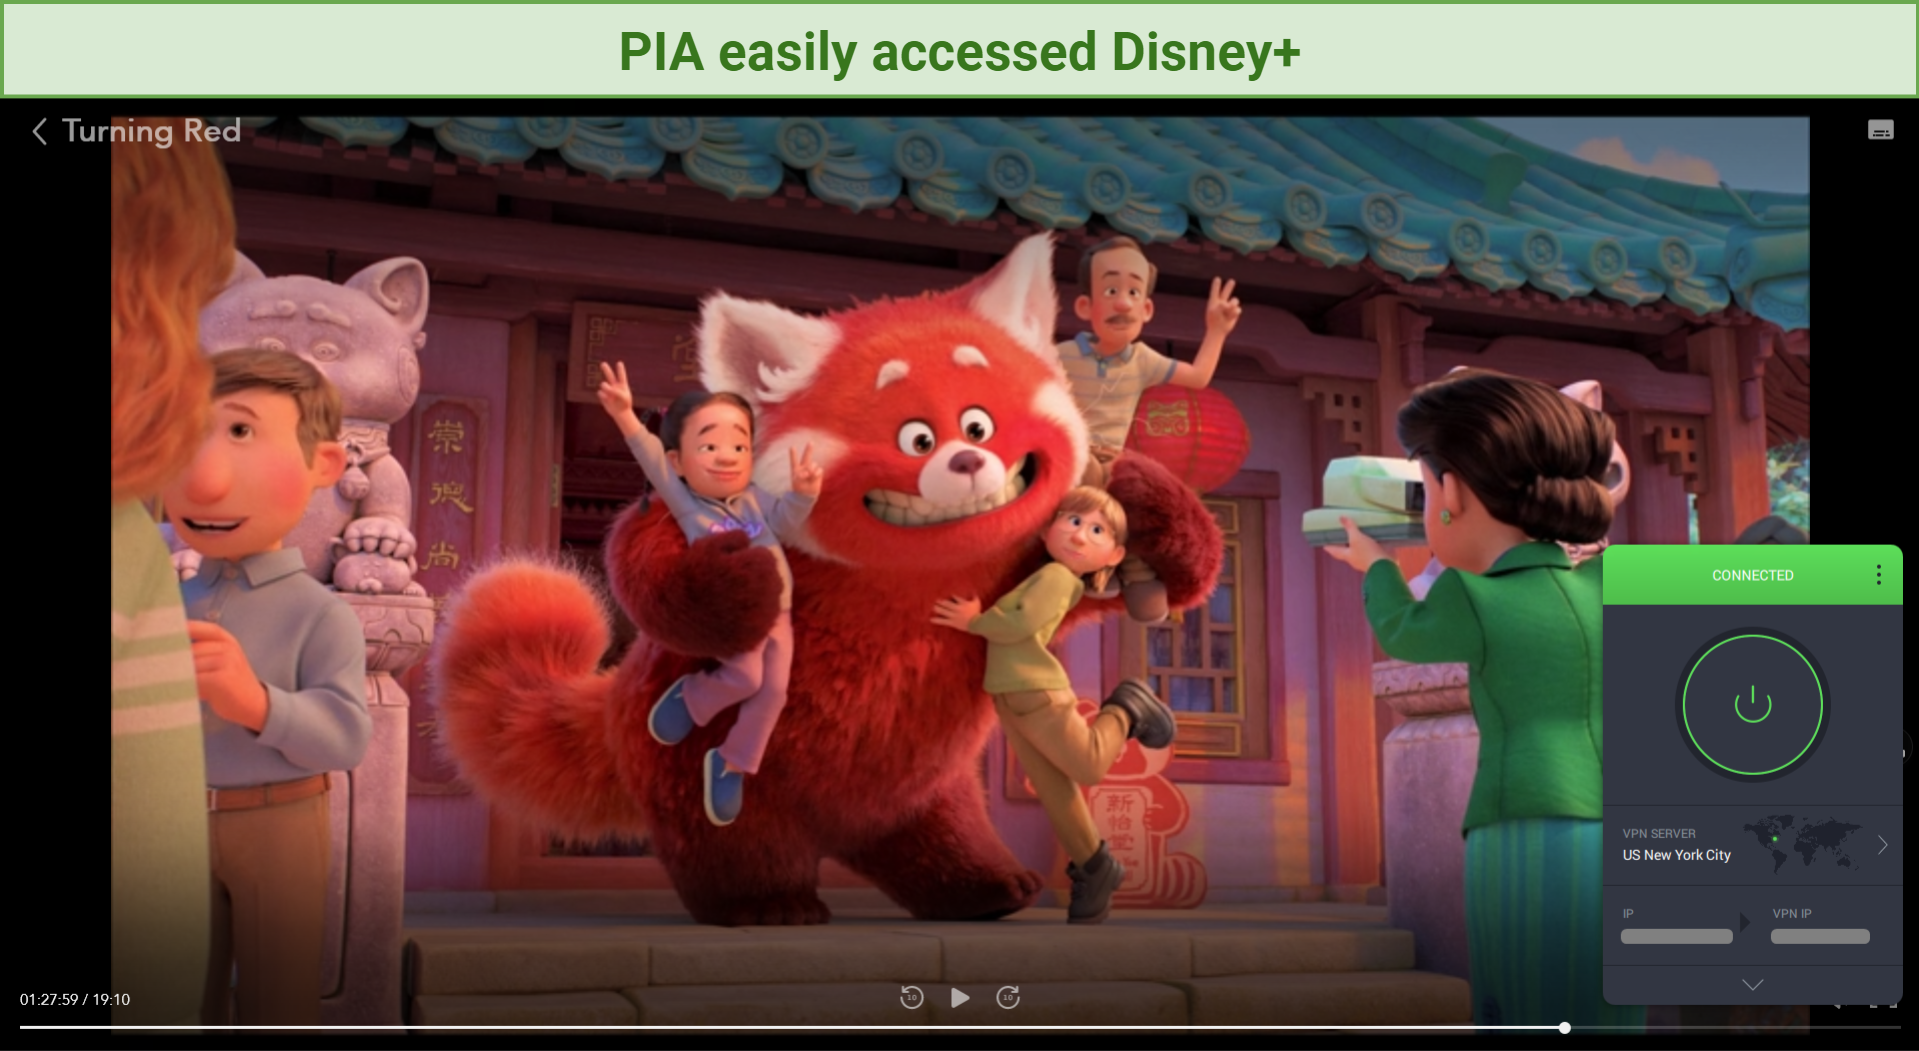 A screenshot of Disney+ being accessed by Private Internet Access VPN and playing the movie Turning Red.